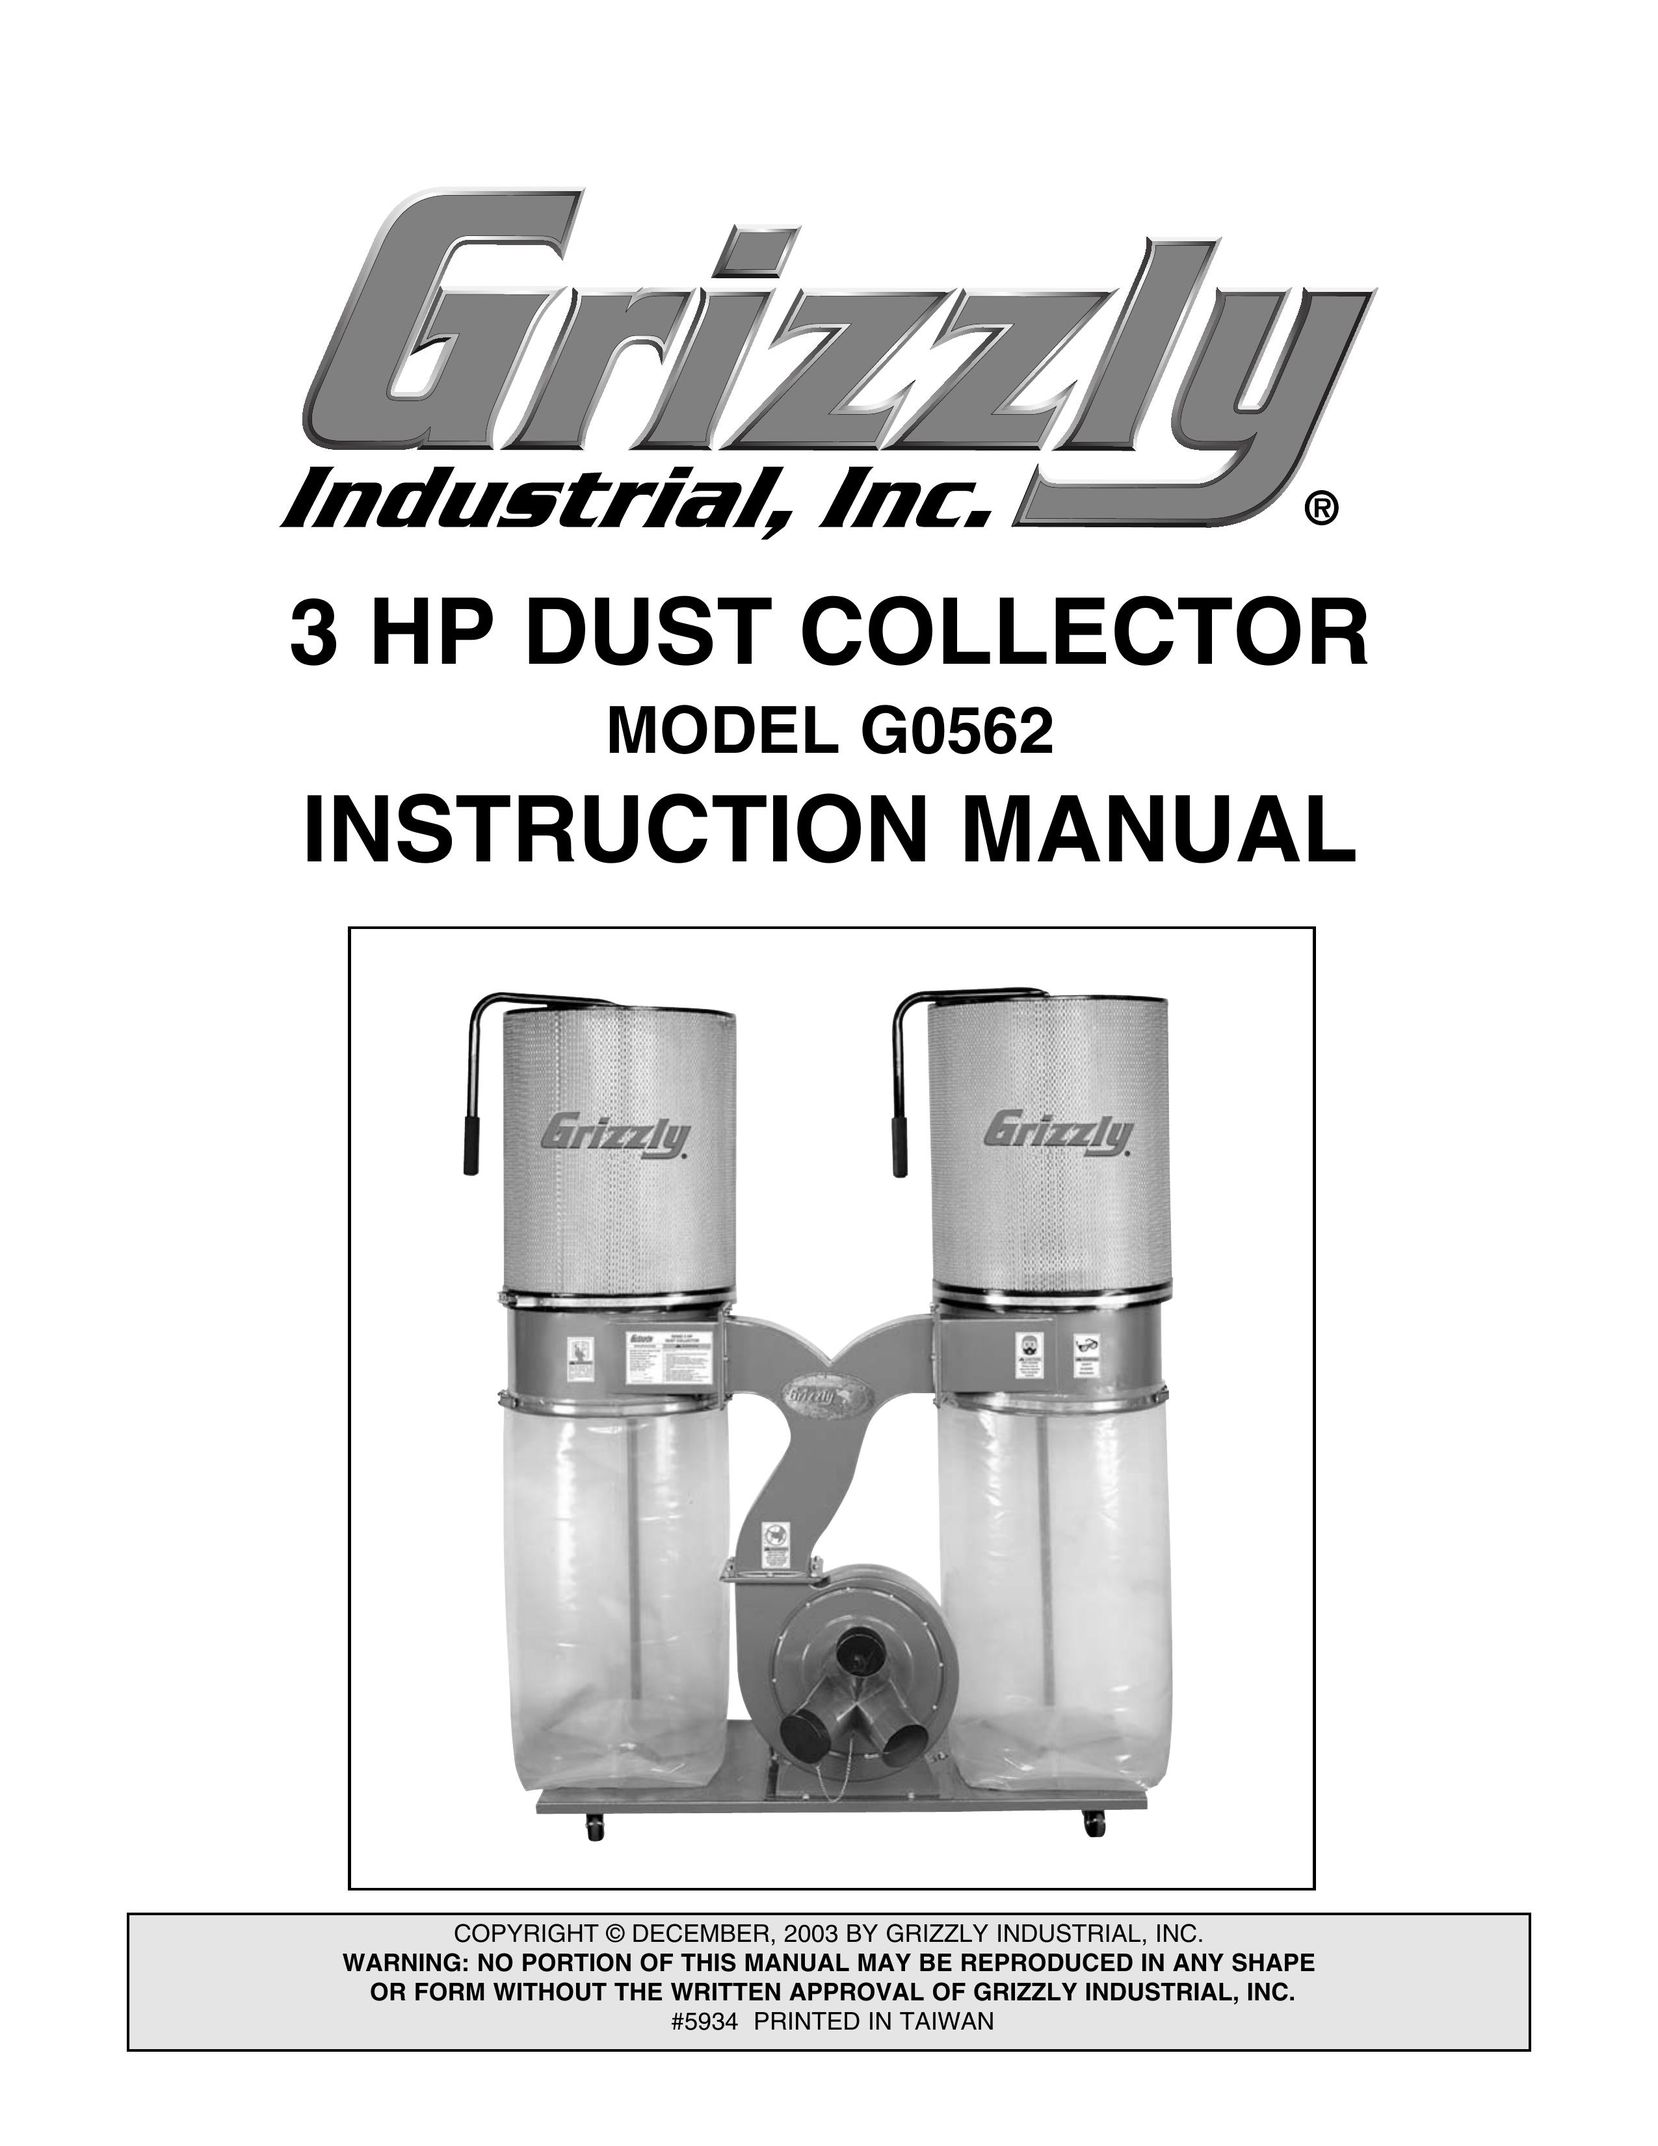 Grizzly Model G0562 Dust Collector User Manual